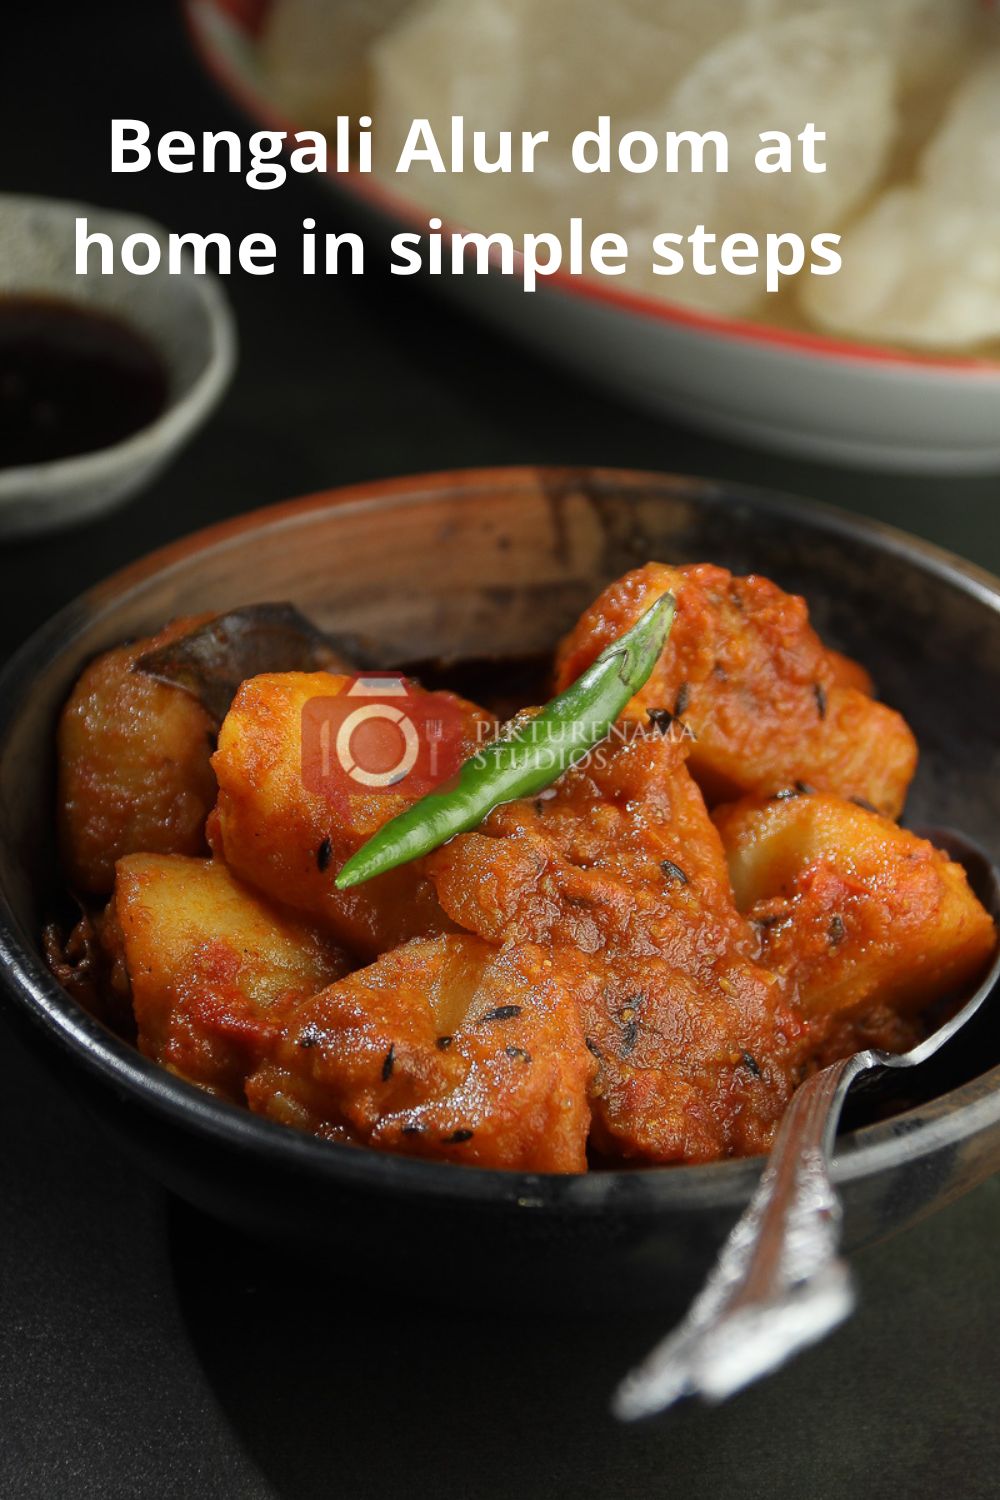 Easy way to make bengali Aloo Dum at home for Pinterest - 3